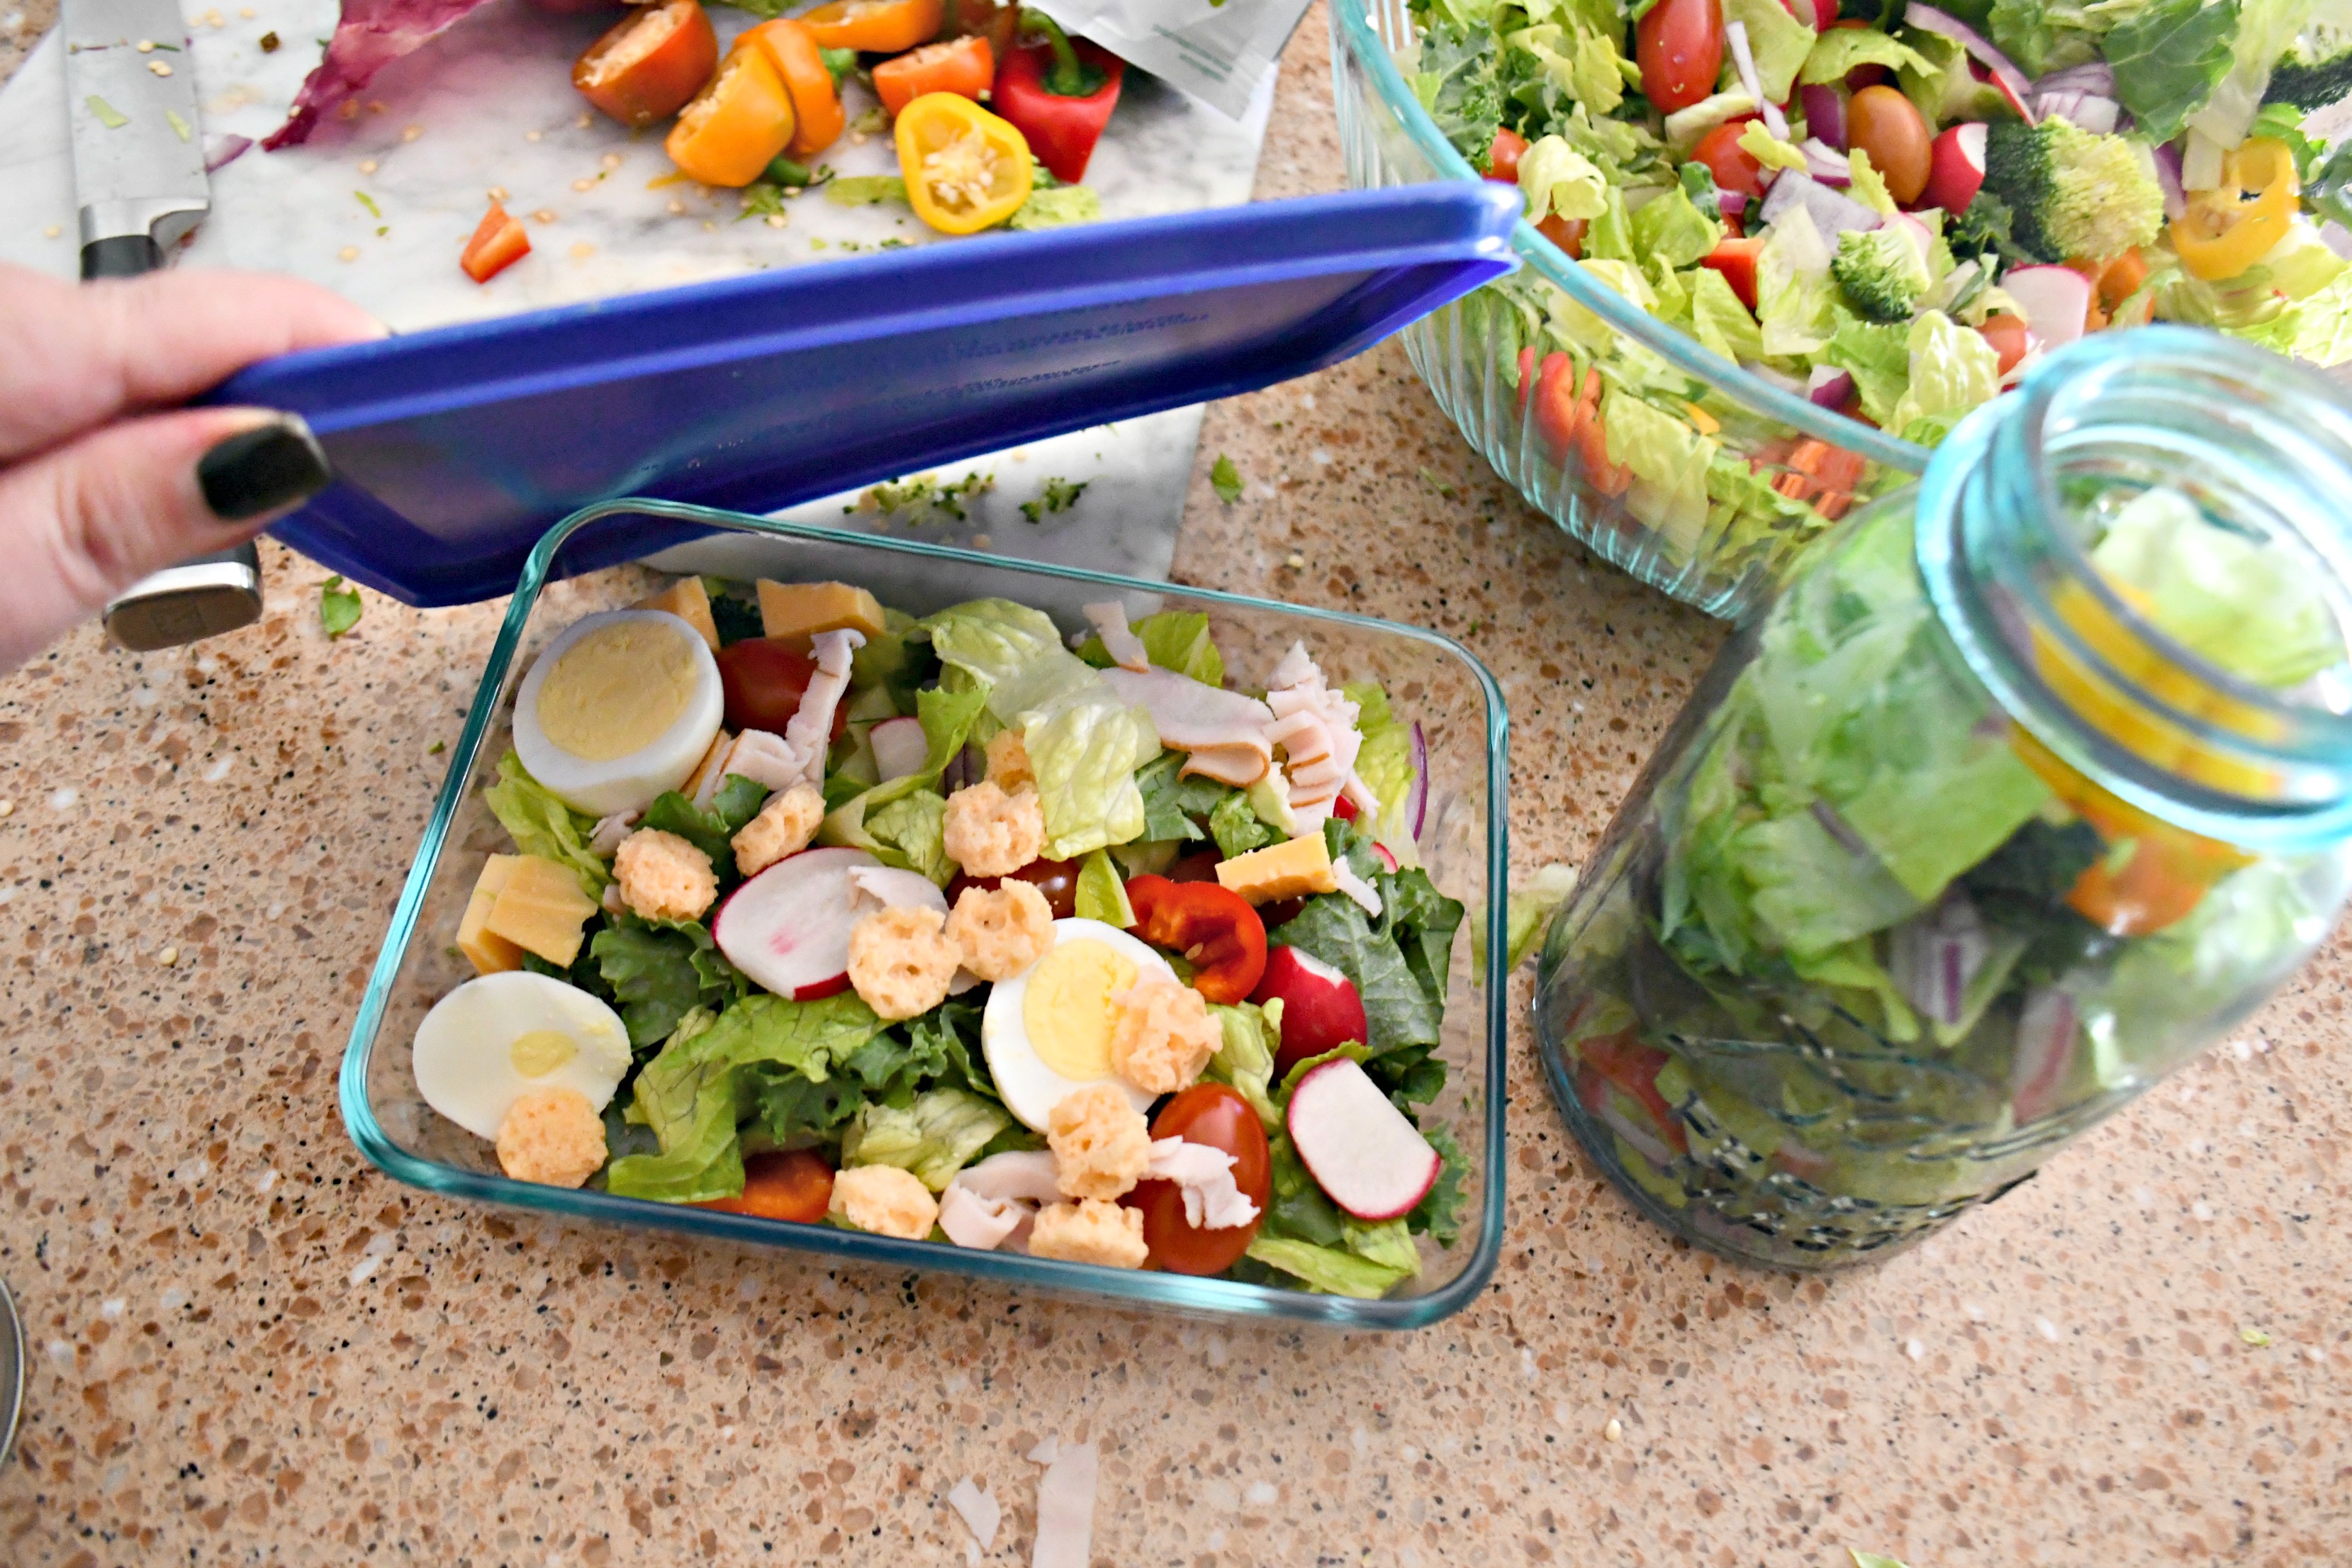 Weekly Sunday Salad Prep and my favorite dressing recipe travel well in these square glass or jar storage containers.